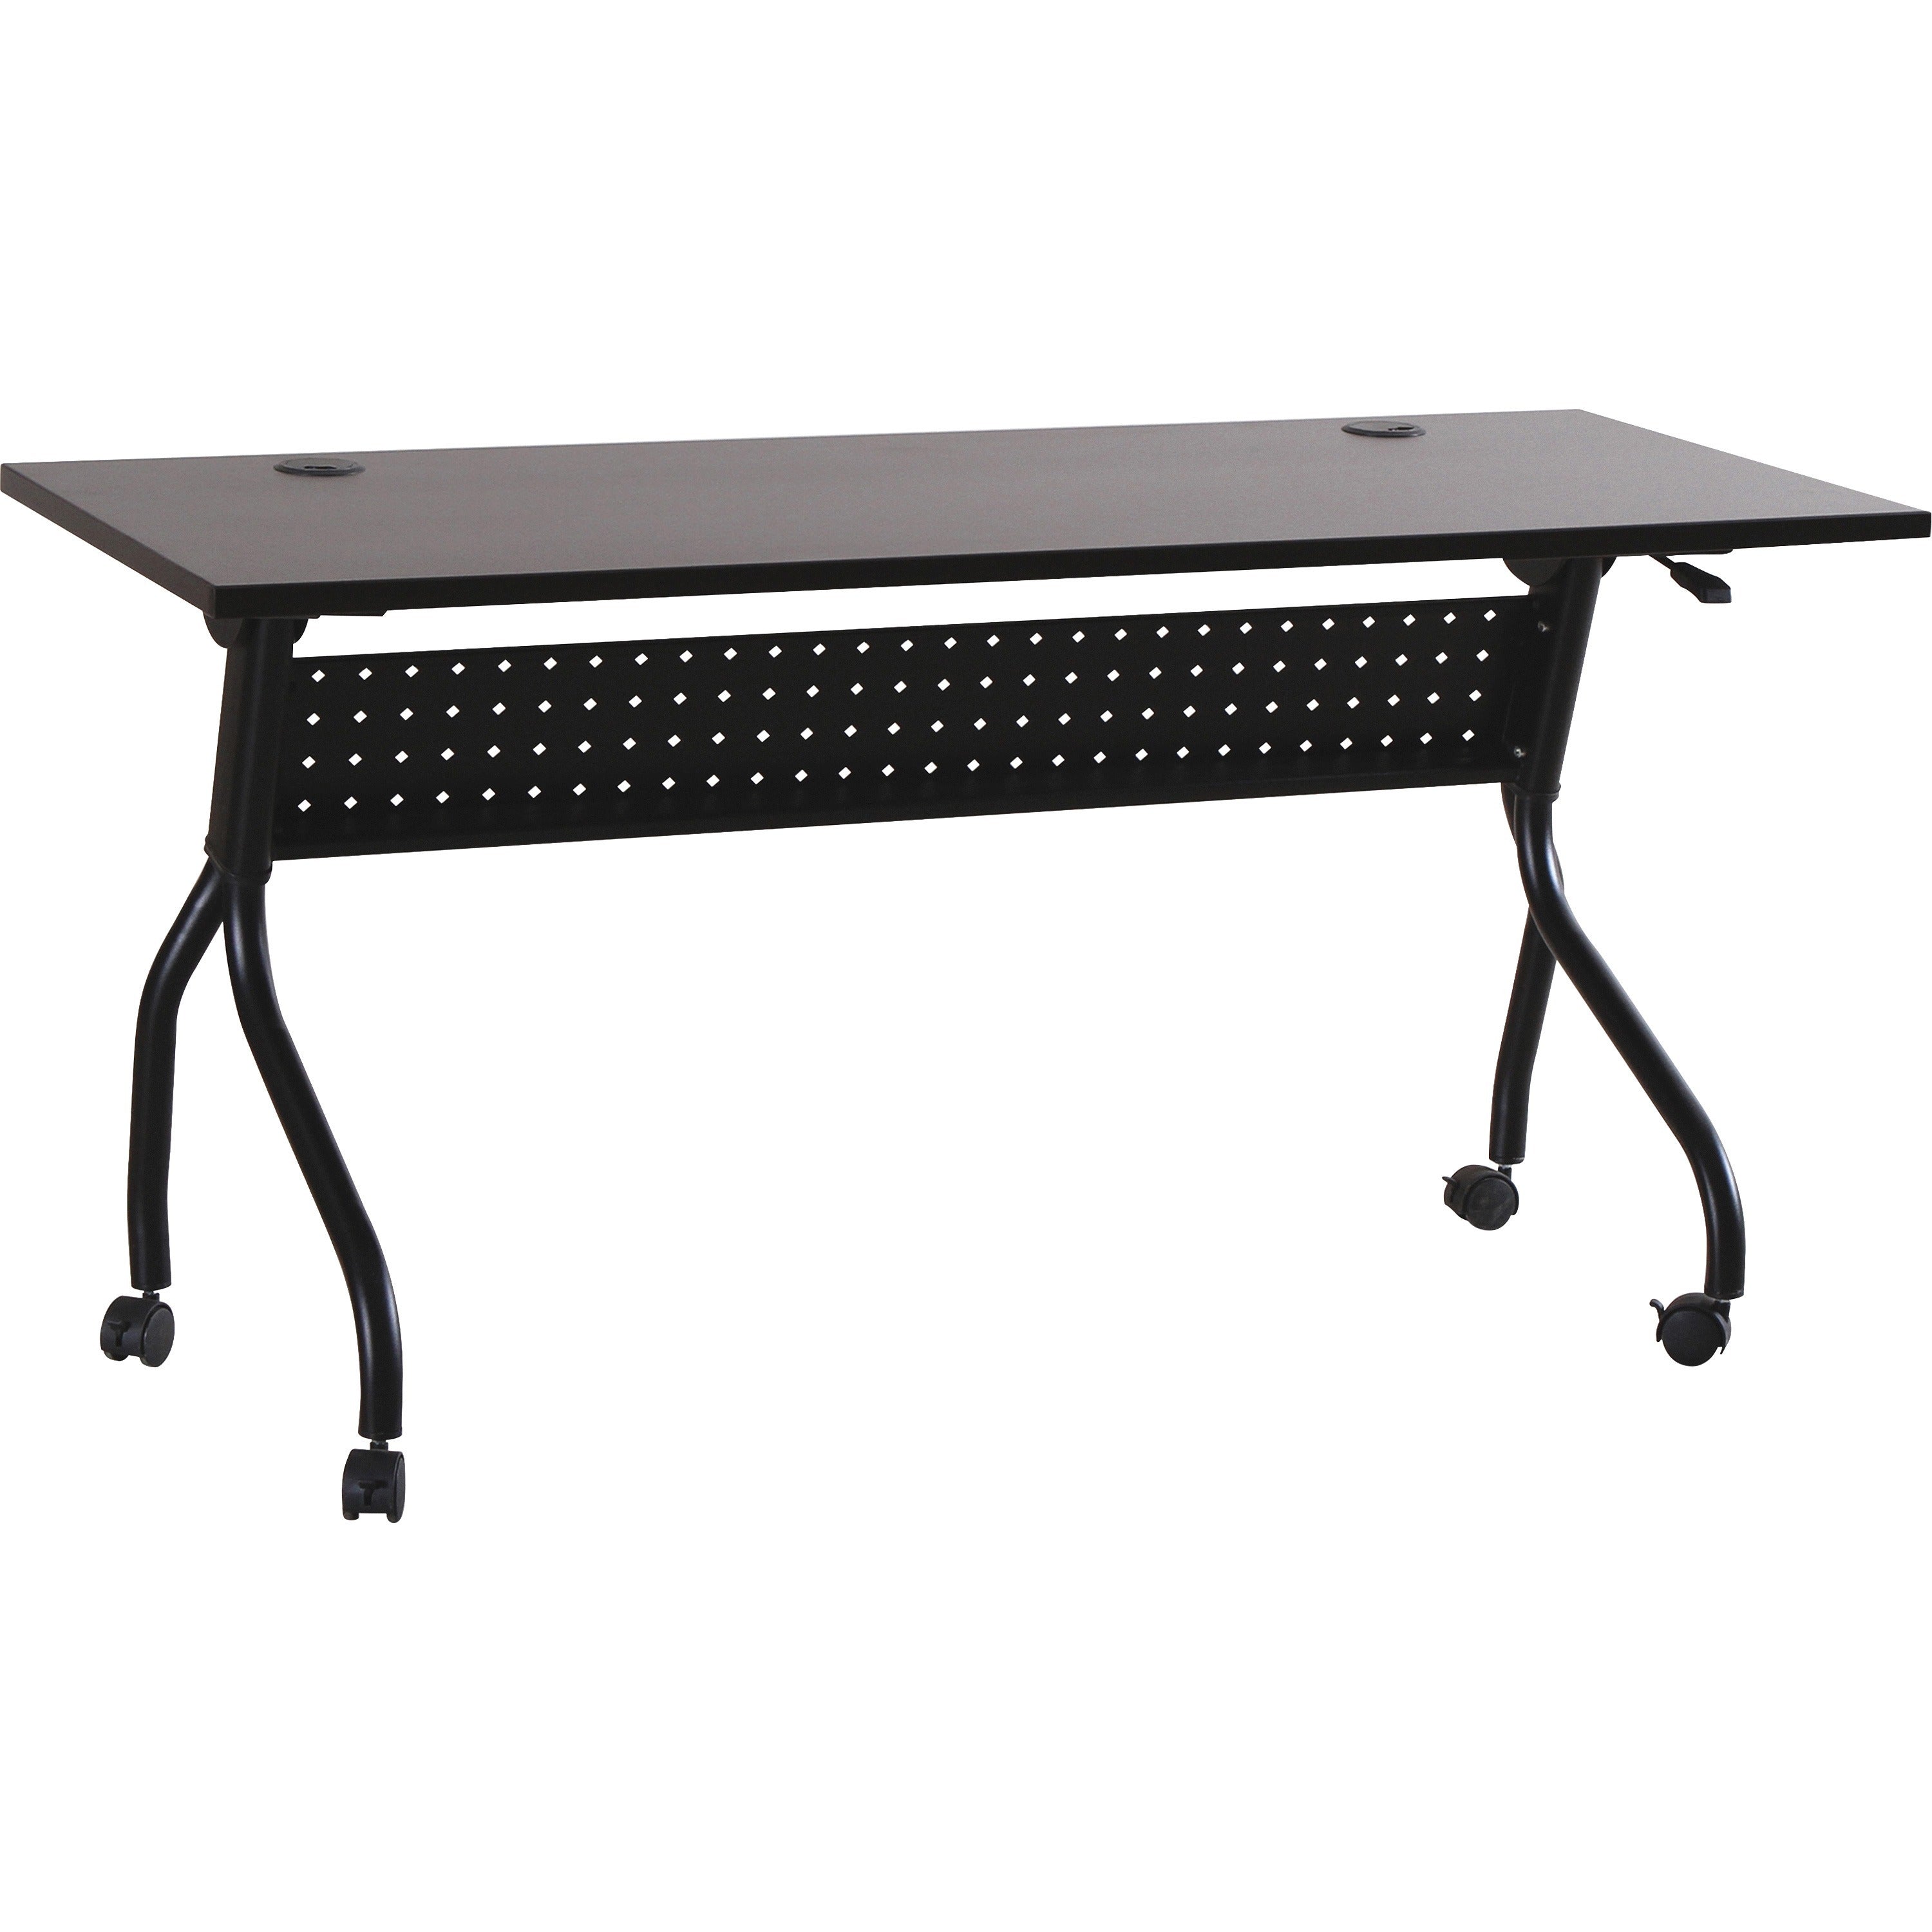 Lorell Flip Top Training Table - For - Table TopRectangle Top - Four Leg Base - 4 Legs x 60" Table Top Width x 23.50" Table Top Depth - 29.50" Height x 59" Width x 23.63" Depth - Assembly Required - Espresso, Black - Melamine, Nylon - 1 Each - 